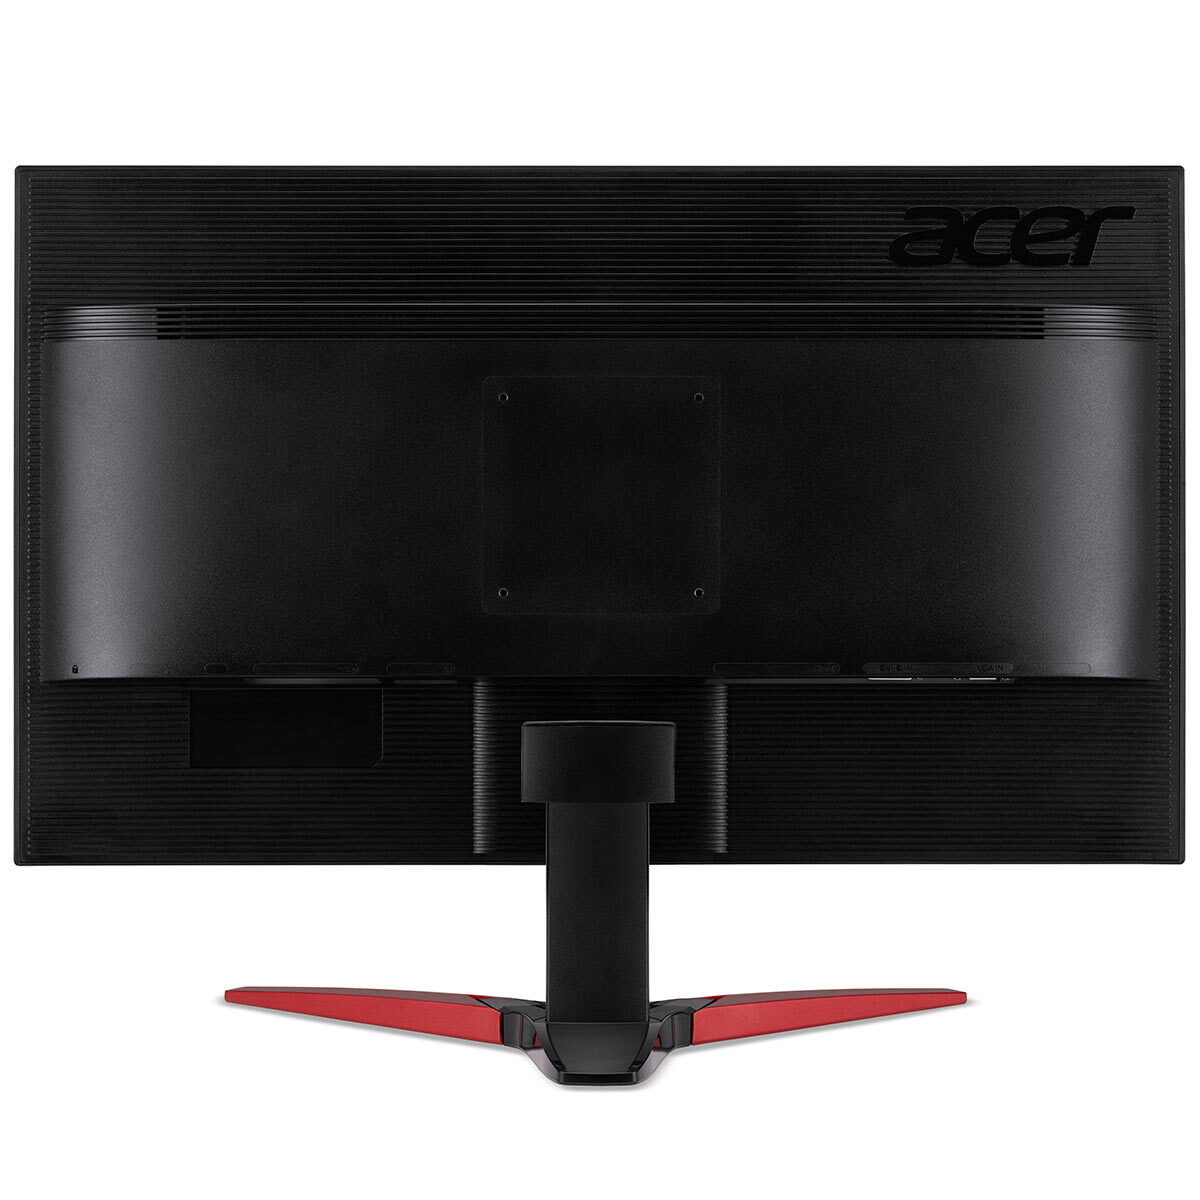 Buy Acer KG251QJbmidpx, 24.5 Inch Full HD Monitor, UM.KX1EE.J04 at costco.co.uk